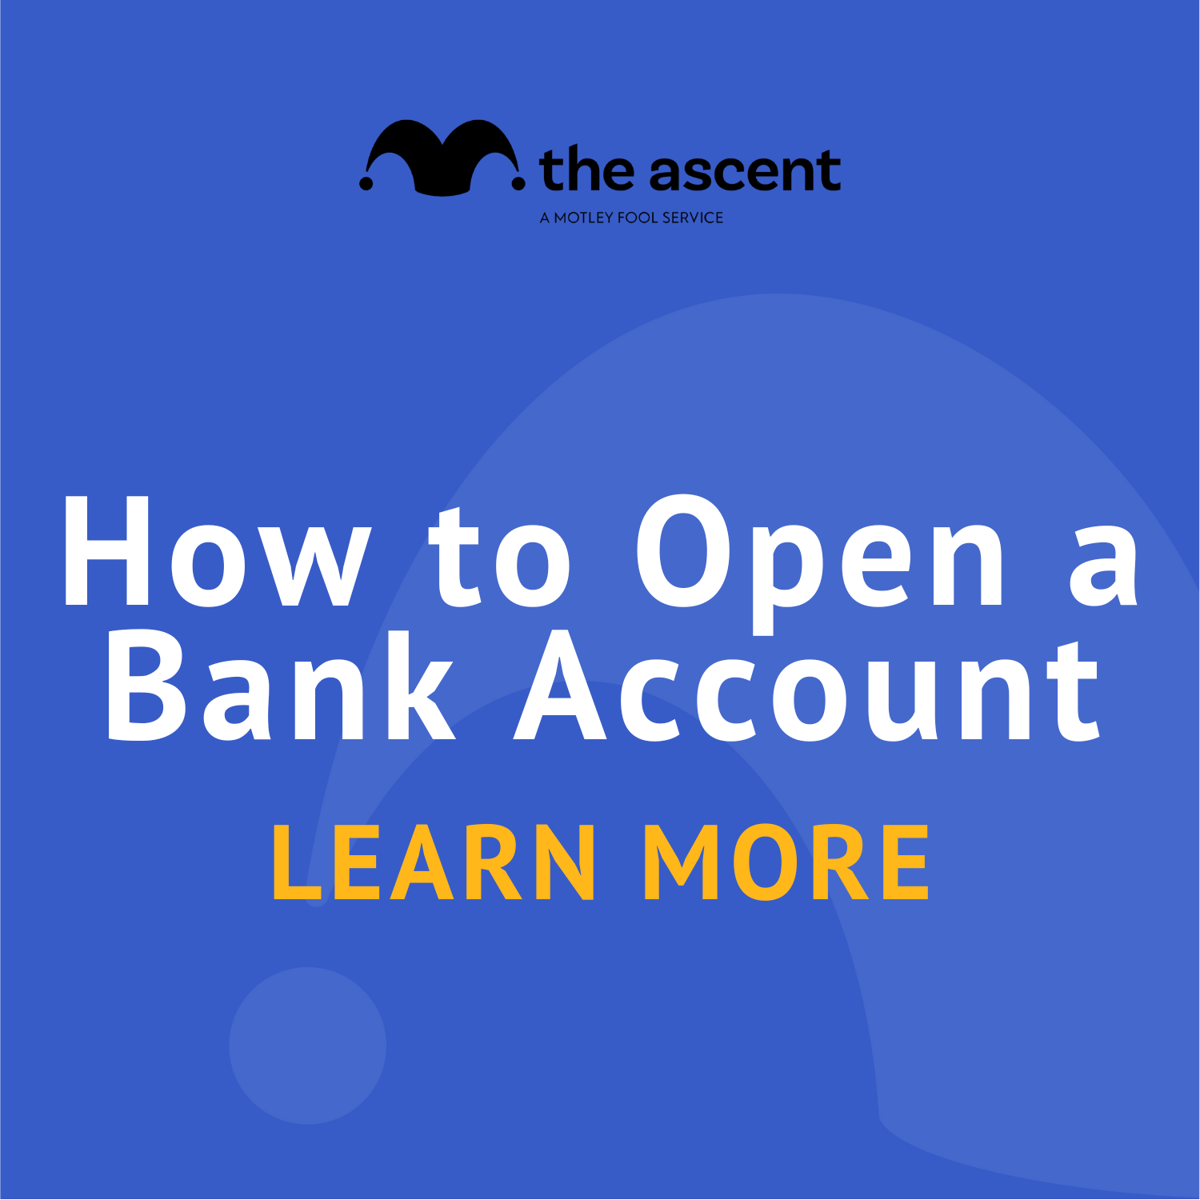 MUST-KNOW TIPS on how to open a French bank account as an American